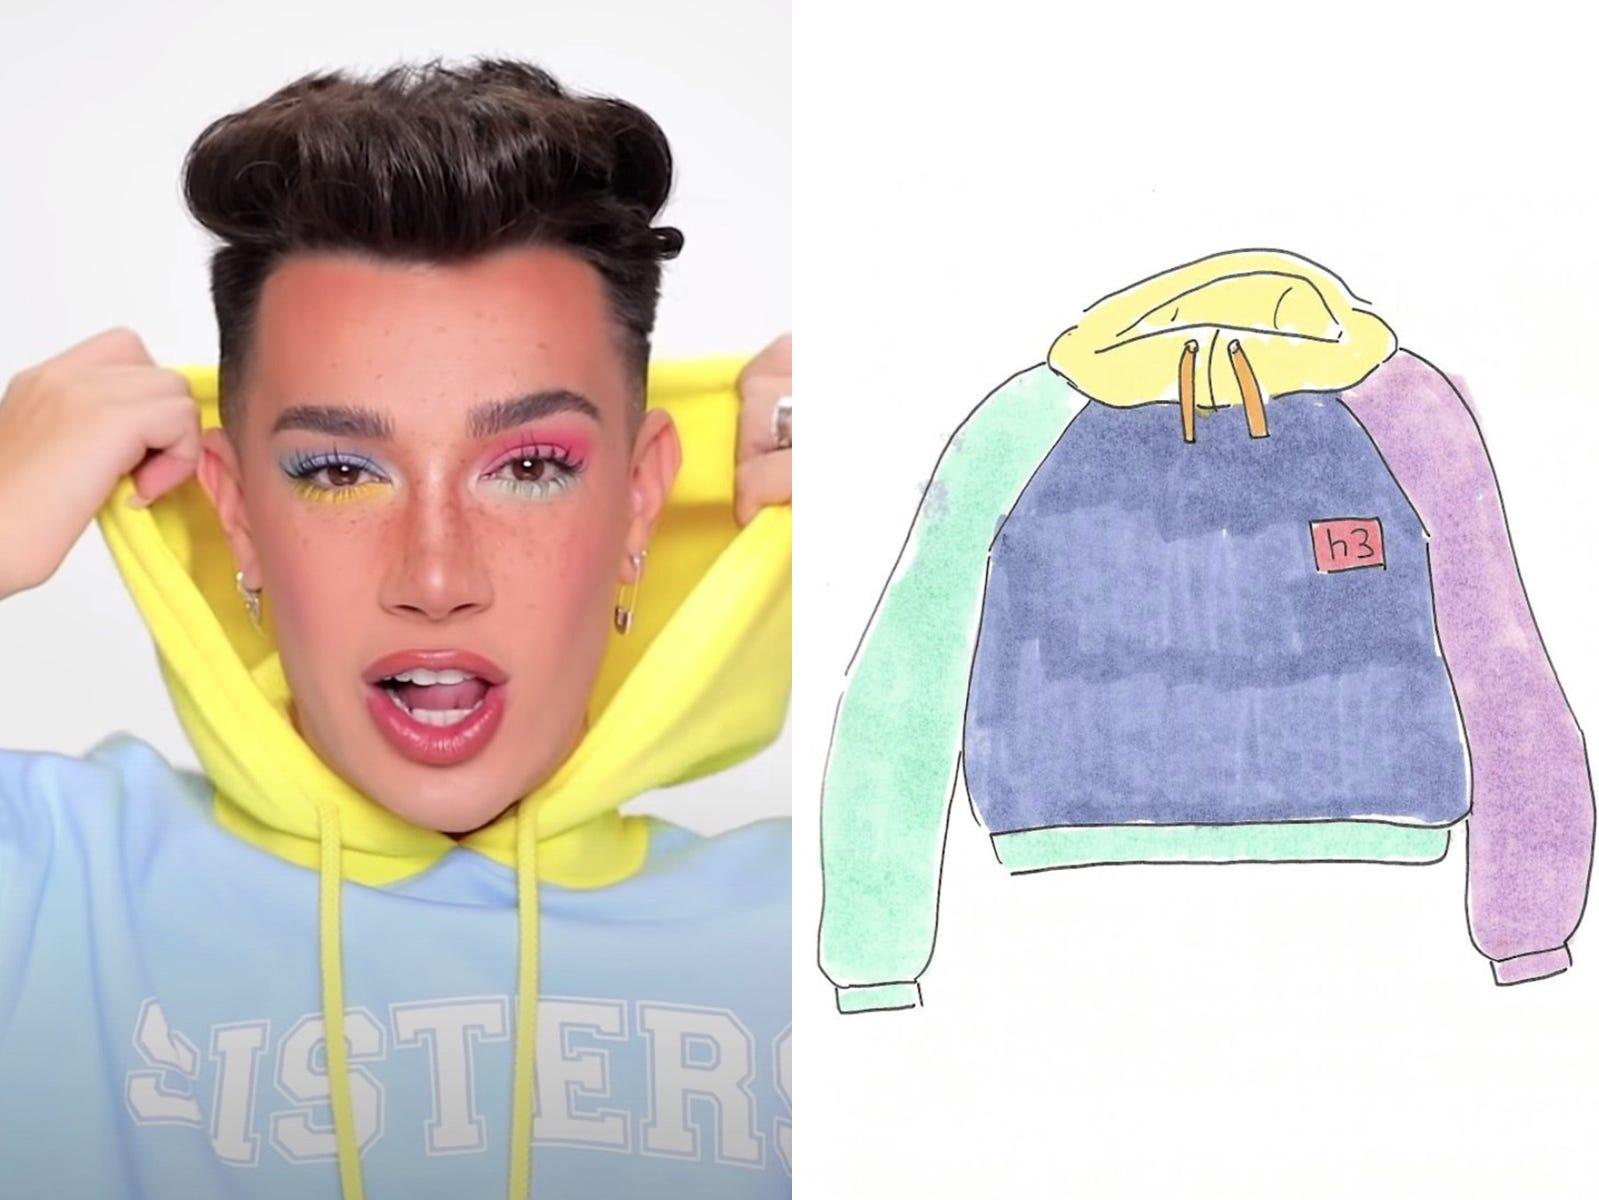 James Charles Accused Of Stealing Merch Designs From Ethan Hila Klein - roblox james charles shirt